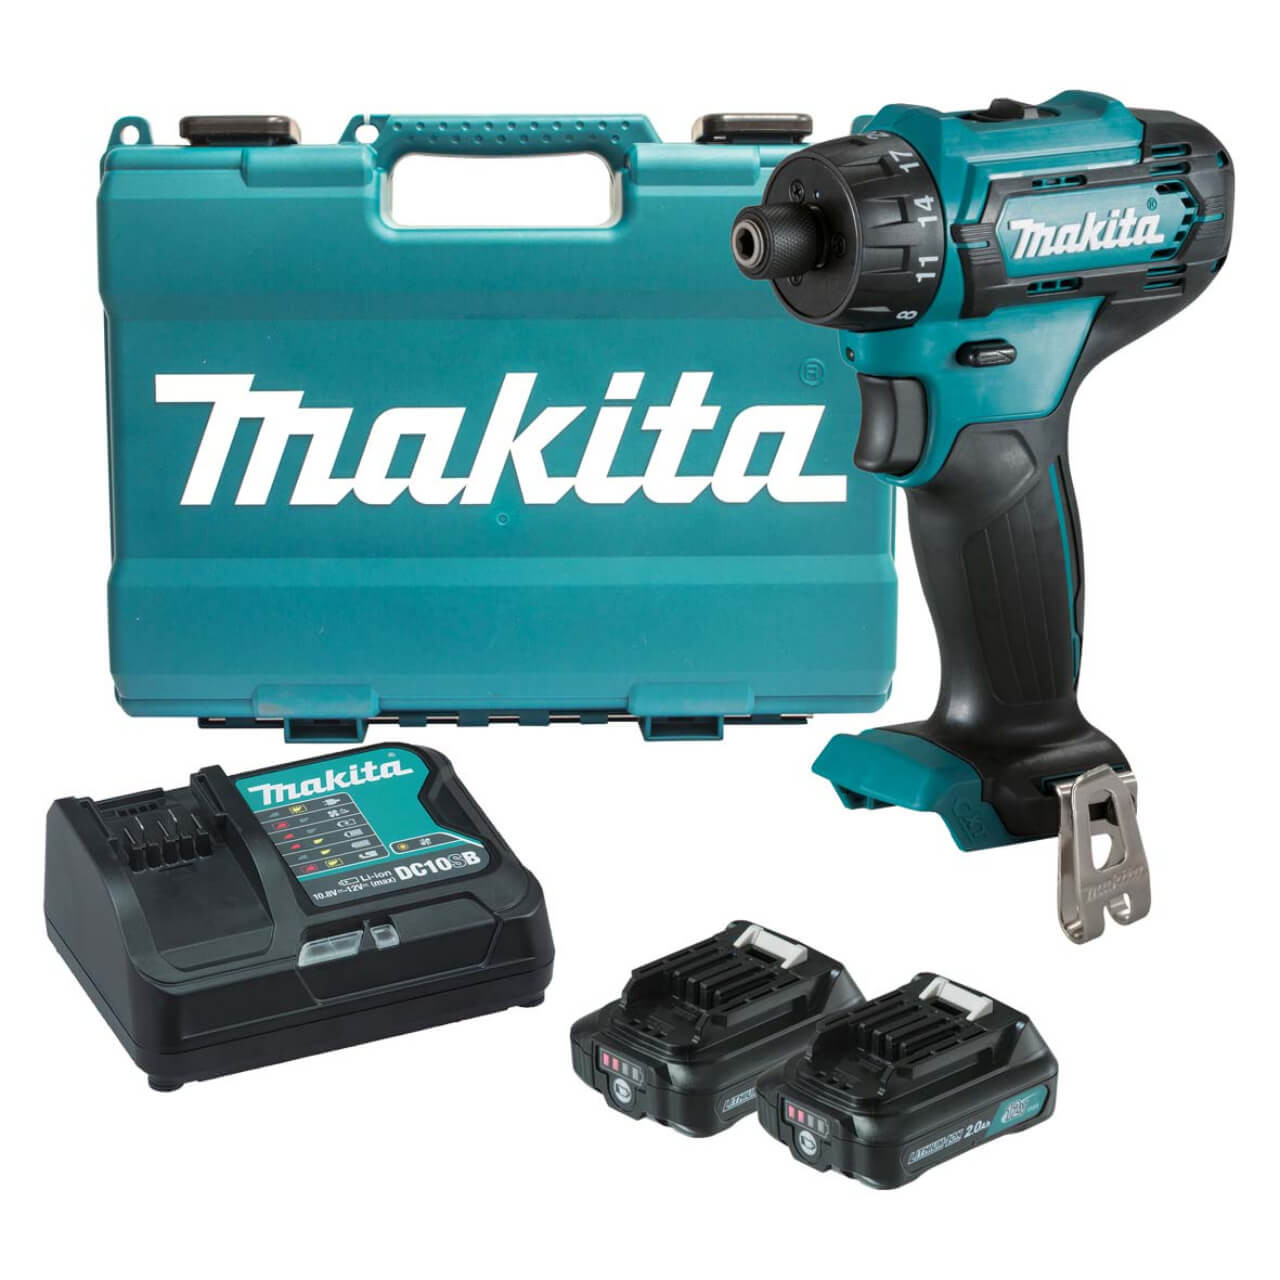 Makita 12V Max 1/4” Hex Chuck Driver Drill Kit - Includes 2 x 2.0Ah Batteries. Rapid Charger & Case